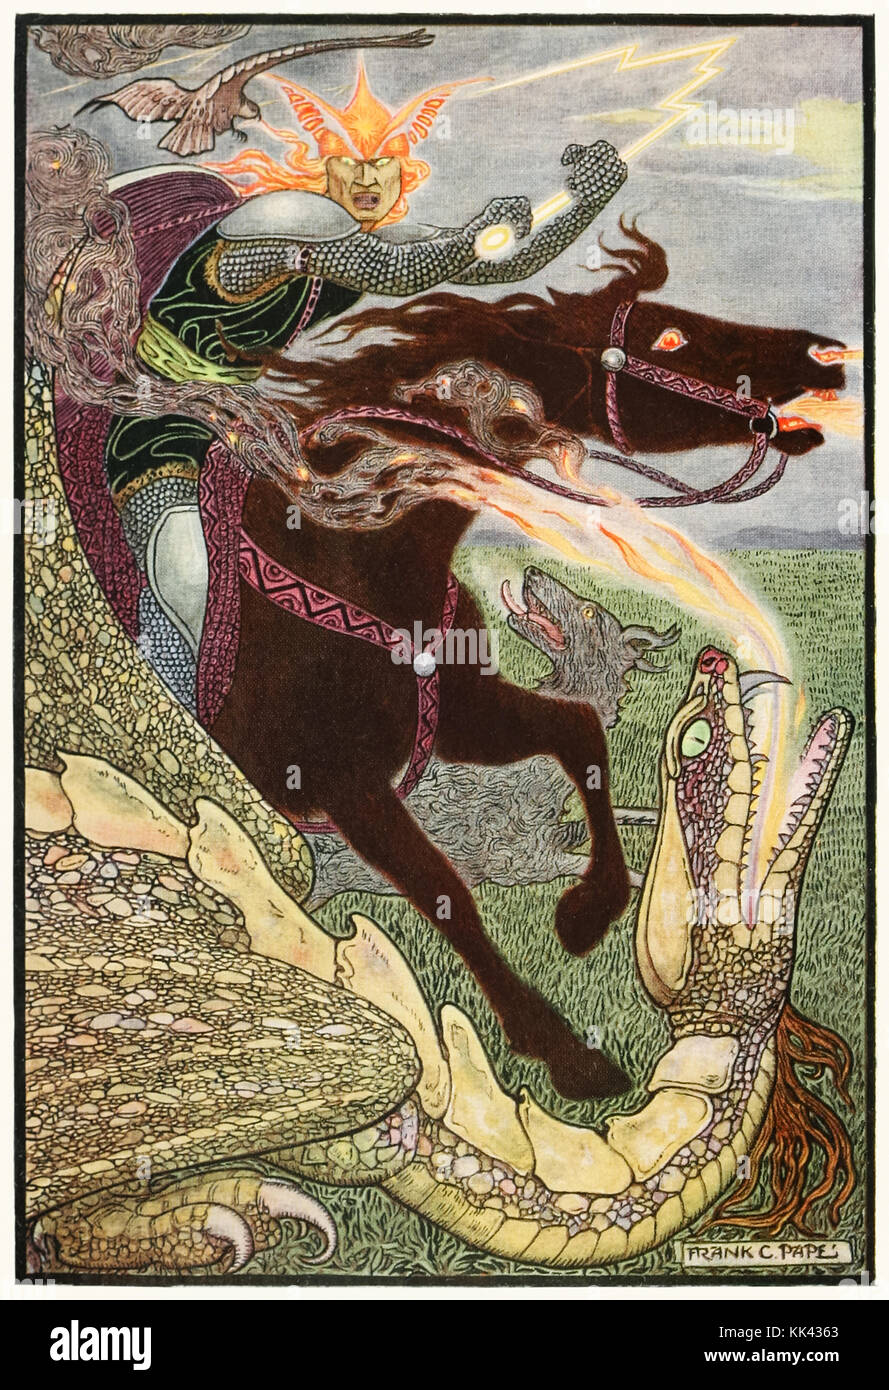 ‘Falcon the Hunter’ from ‘The Russian Story Book’ by Richard Wilson (1878-1916) illustration by Frank C. Papé (1878-1972). See more information below. Stock Photo